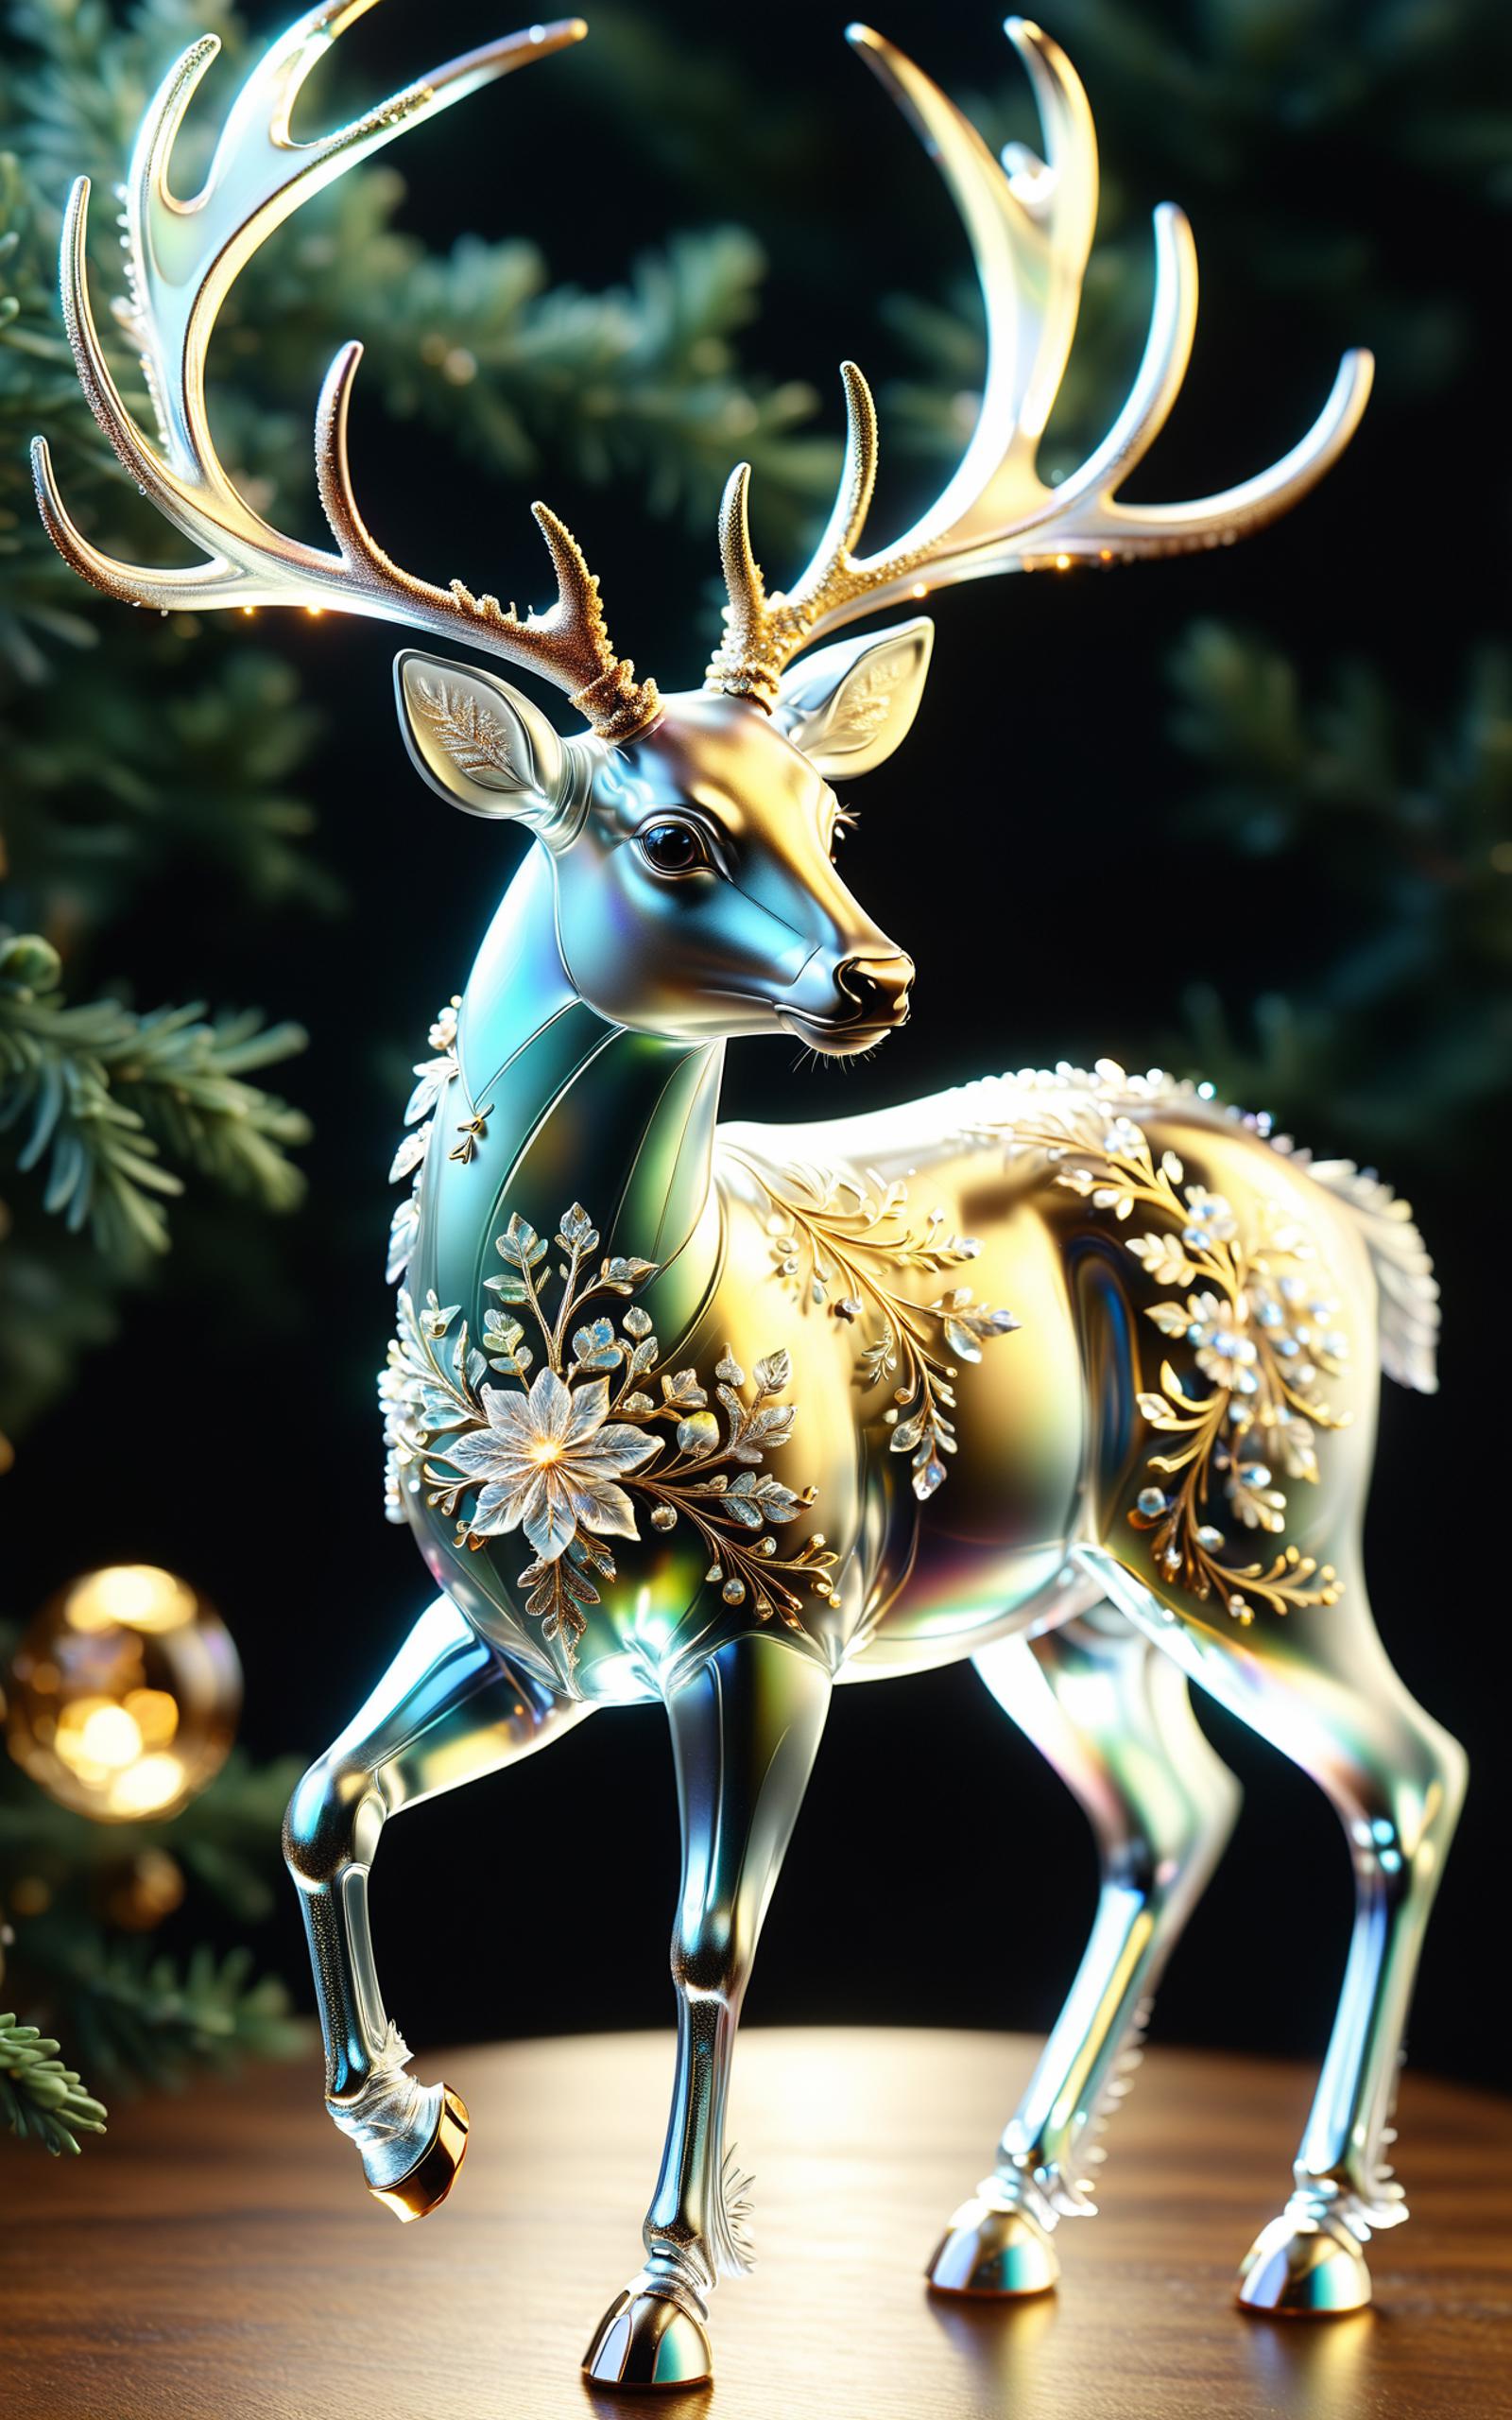 A Gold and Silver Deer Ornament Decoration on a Christmas Tree